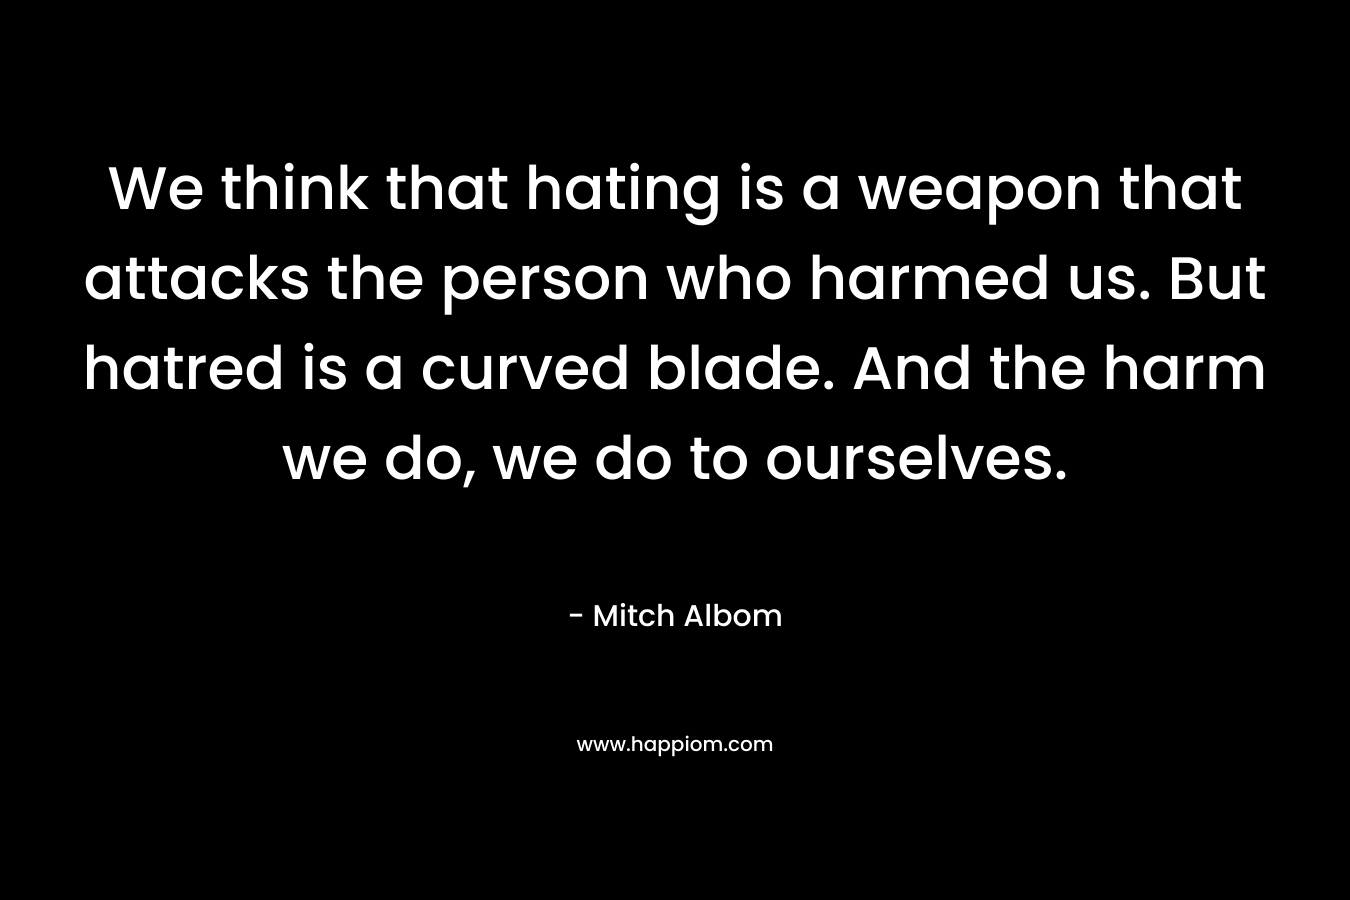 We think that hating is a weapon that attacks the person who harmed us. But hatred is a curved blade. And the harm we do, we do to ourselves.